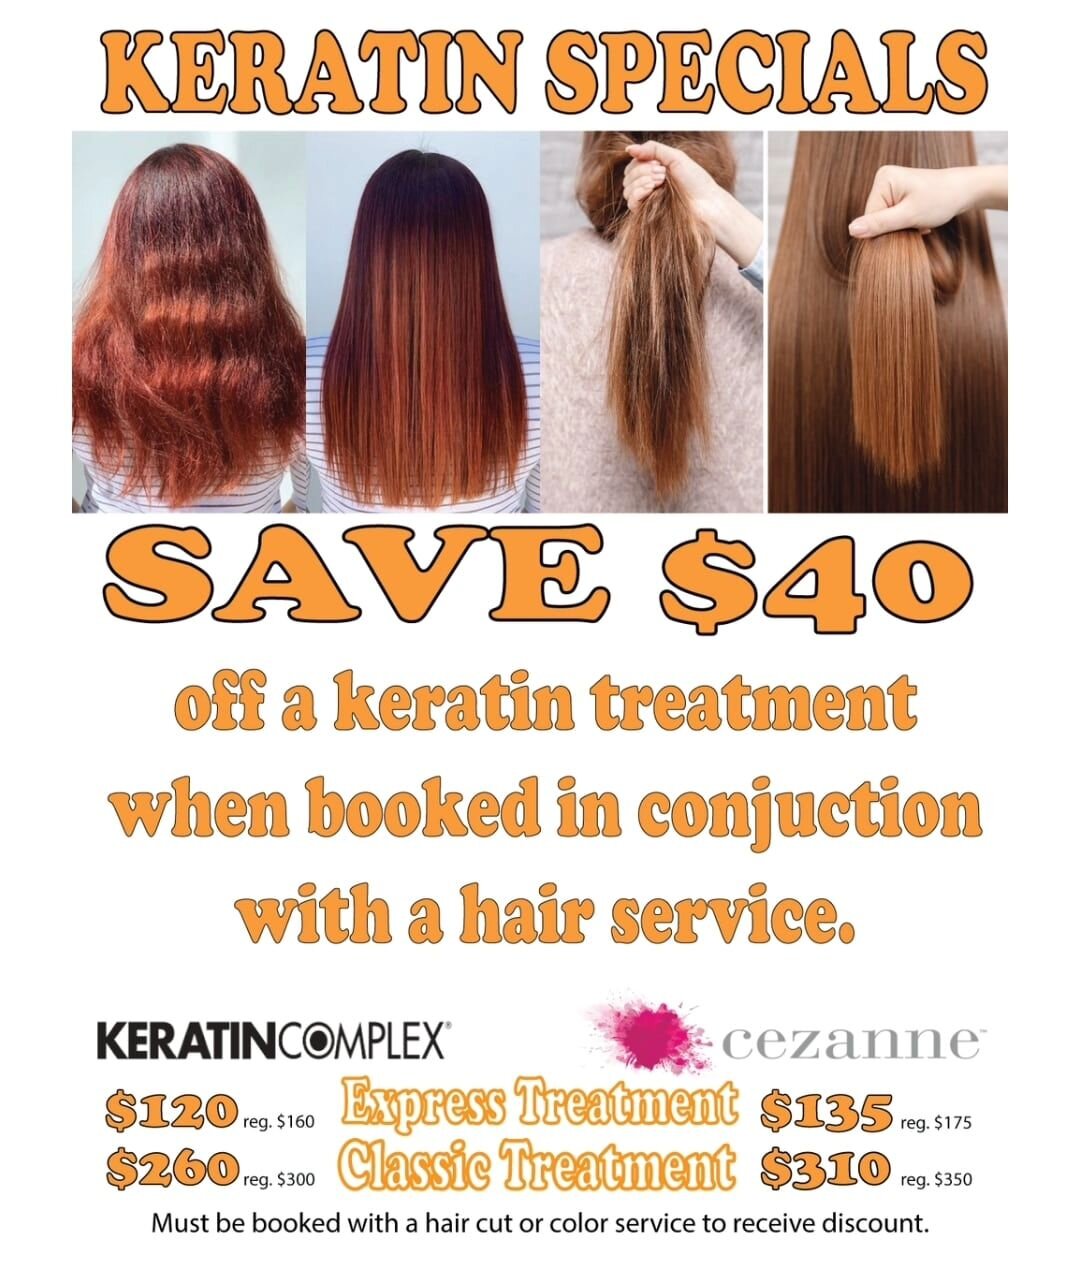 Check out our monthly specials now, including this fabulous keratin special. 
https://balancehairspa.com/specials
#beinperfectbalance #beautyatbalance #bemycanvas #dreamincolor #downtownwestchesterpa #downingtownpa
@spence.cafe
@thegspotvintage
@down